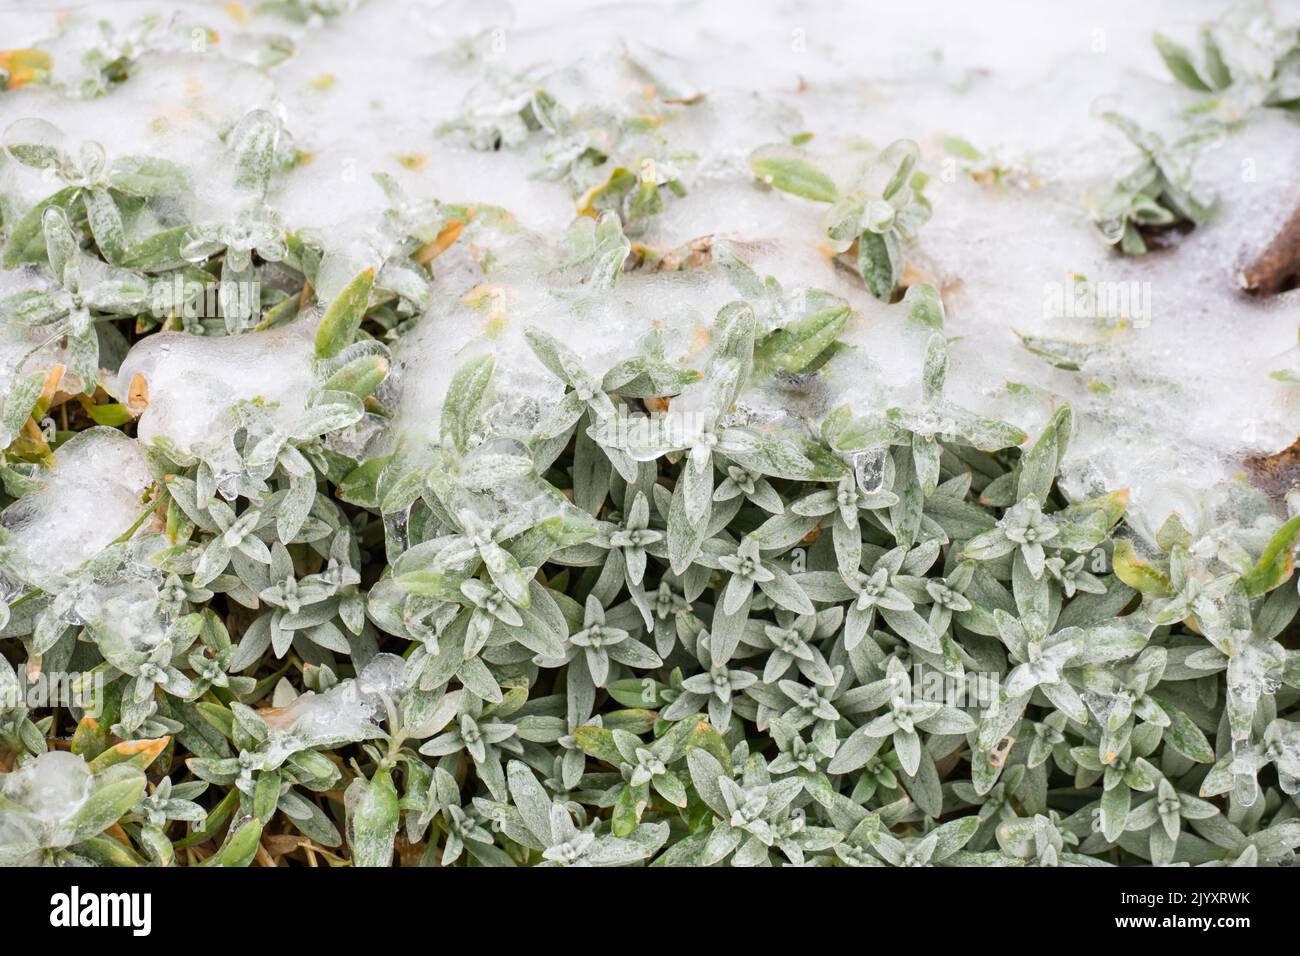 Snow in summer plant covered with ice. Freezing ice on the Cerastium Tomentosum. Icing coat on the garden flowers. Freezing, raining, hailstorm. Stock Photo